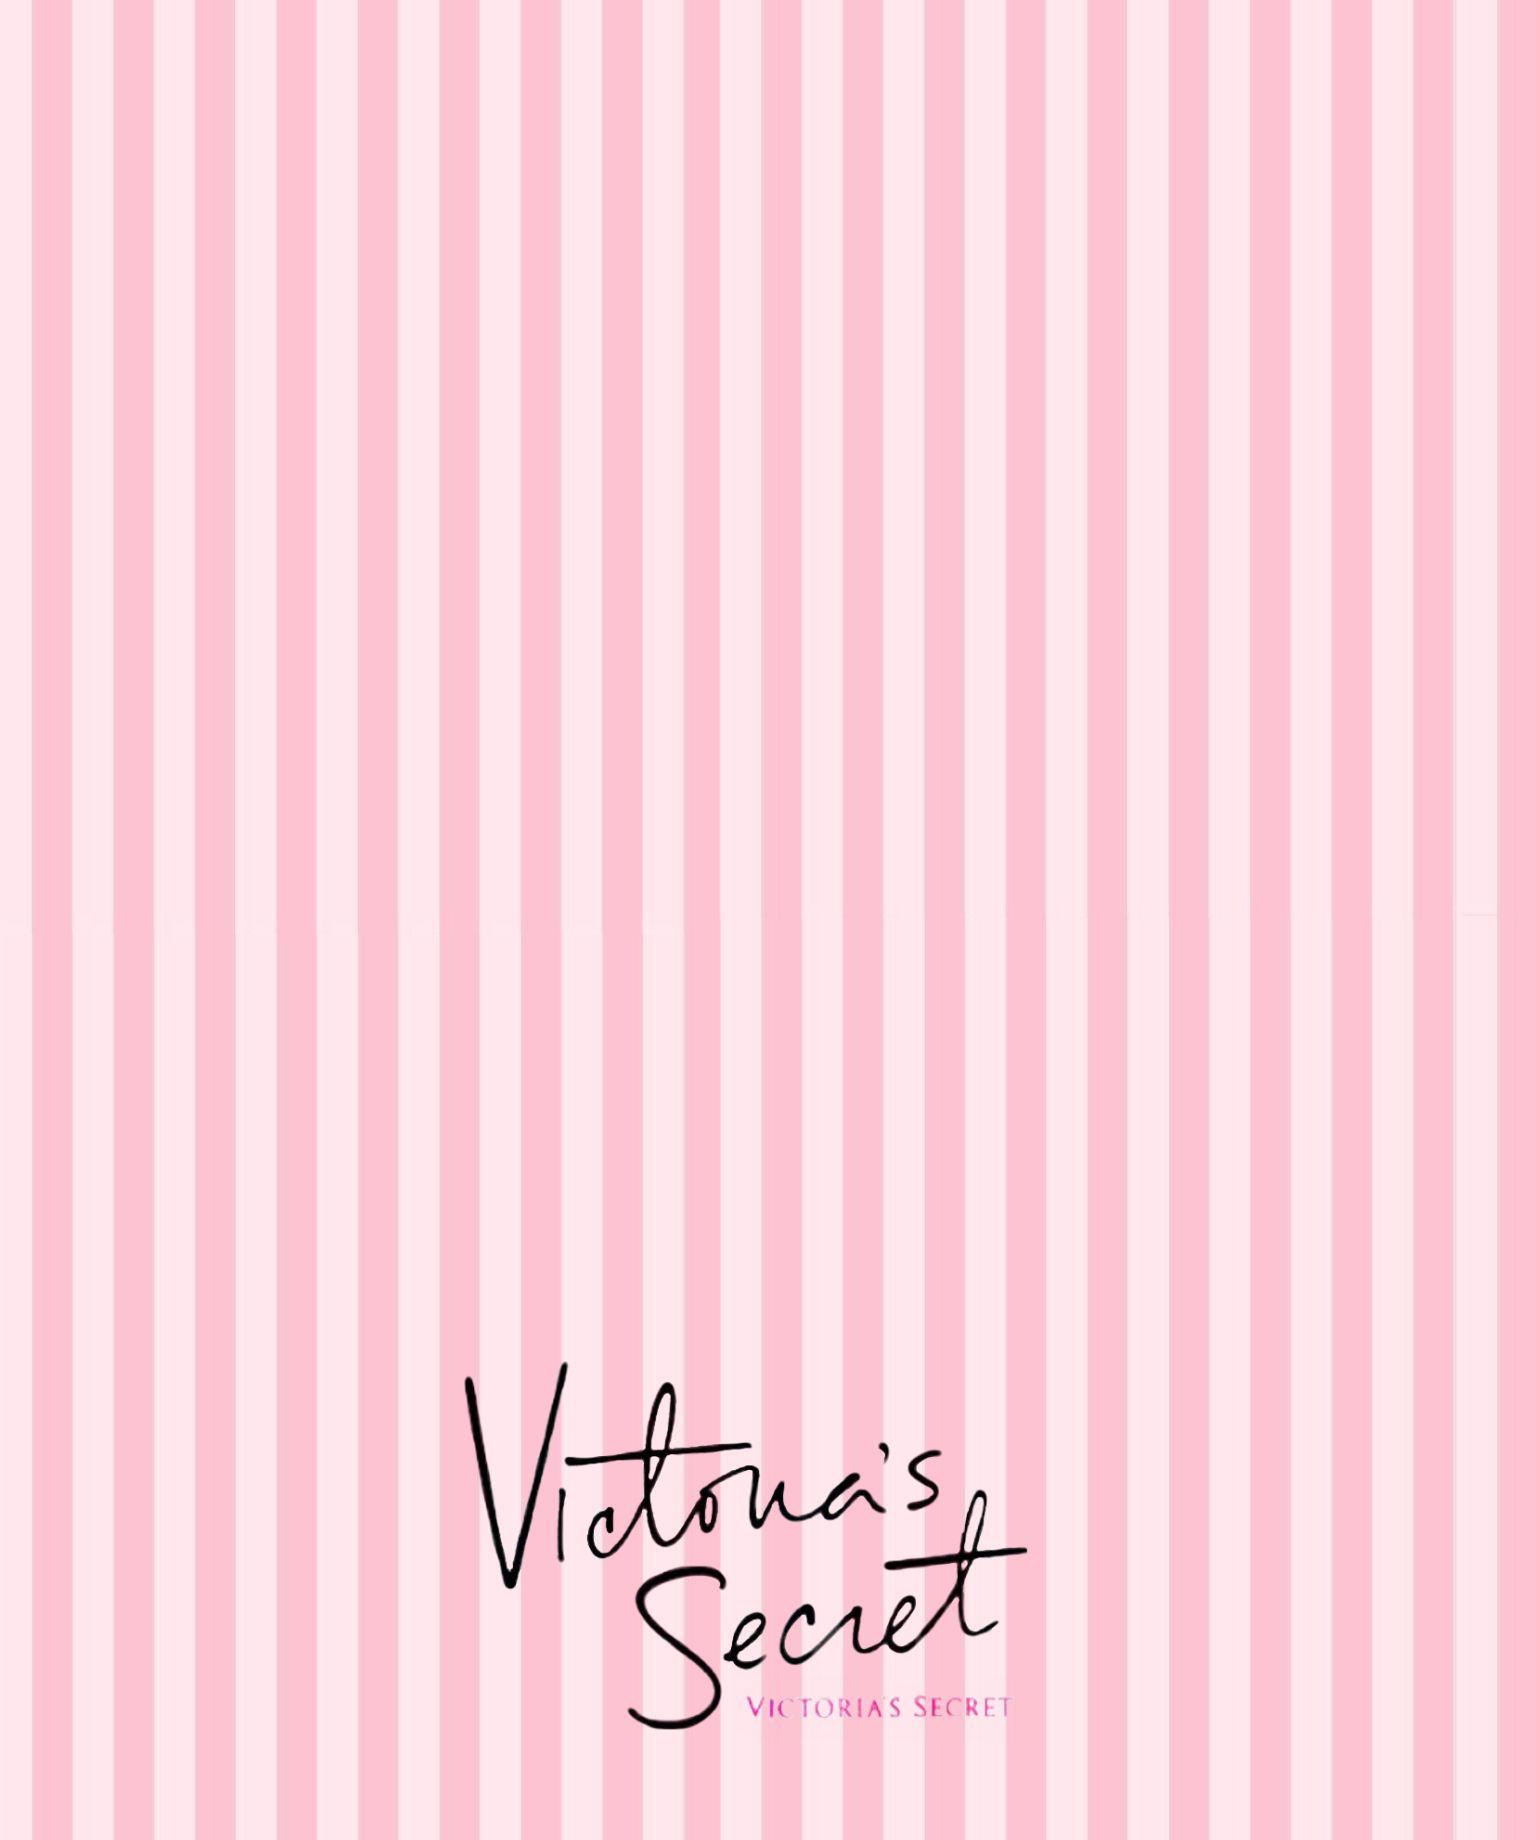 Victoria's secret wallpaper made by me ;). Boooo in 2018